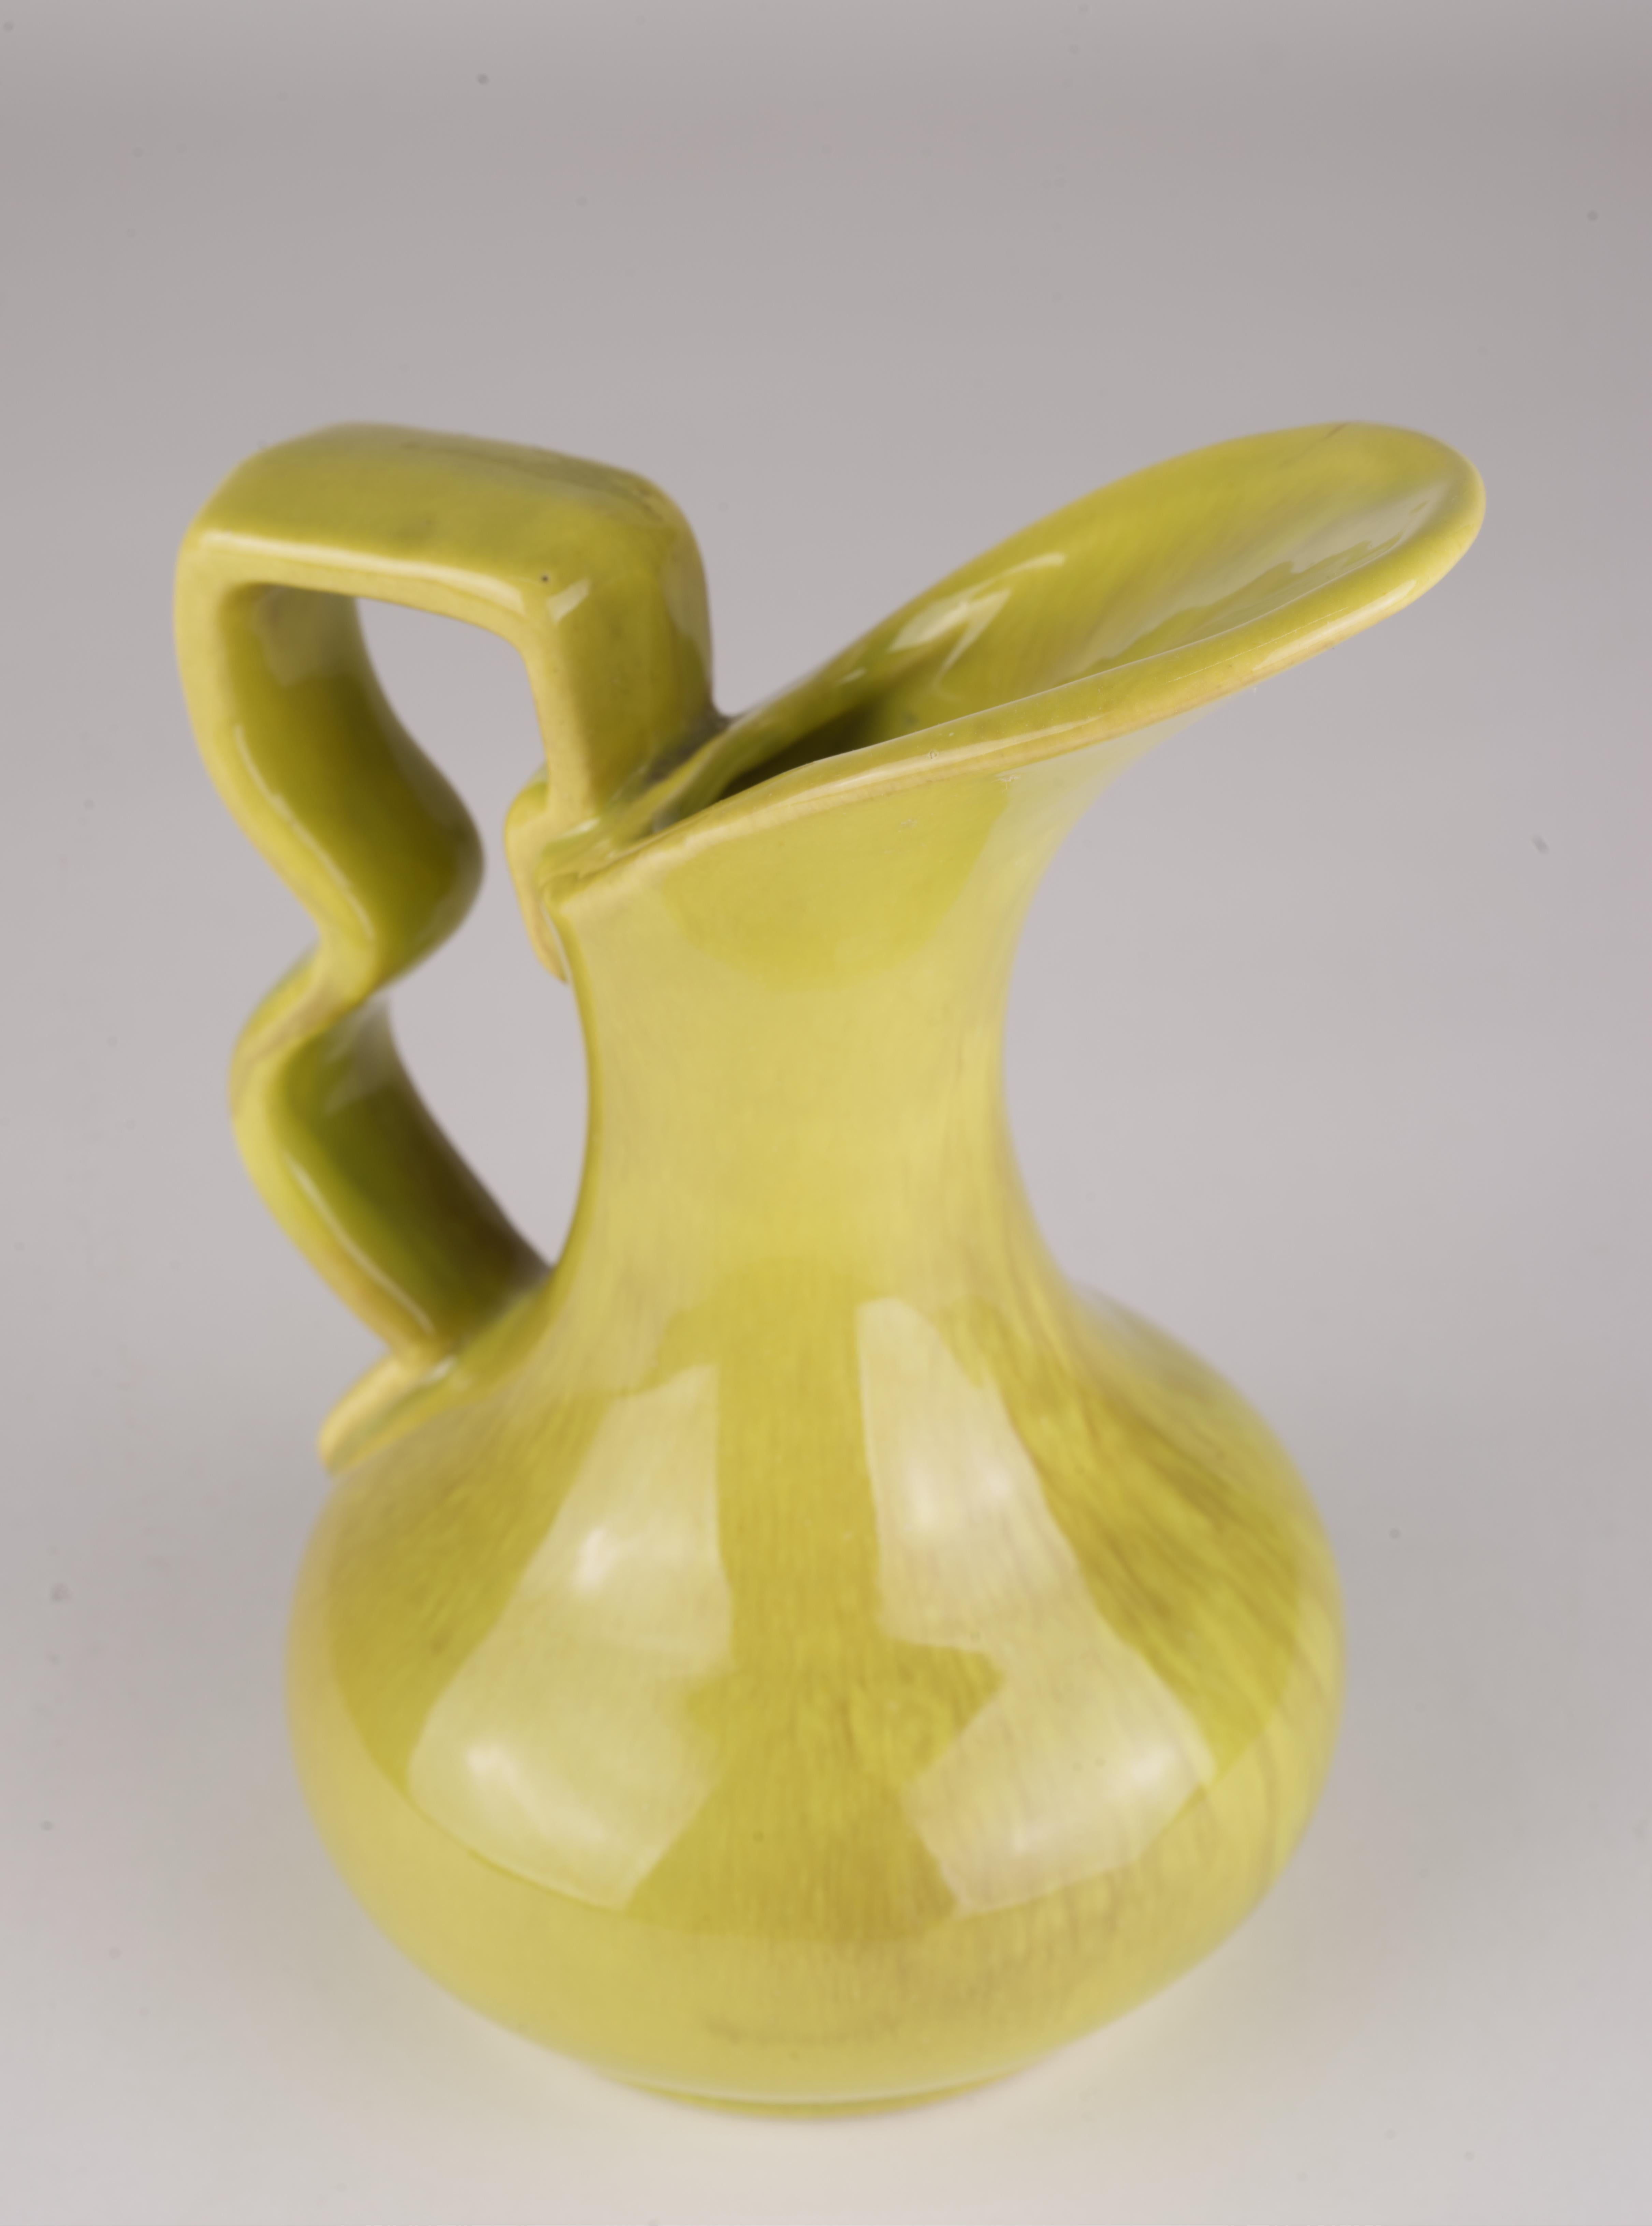 Gonder Pottery Bud Vase Ewer in Chartreuse Drip Glaze 1940s-1950s For Sale 5